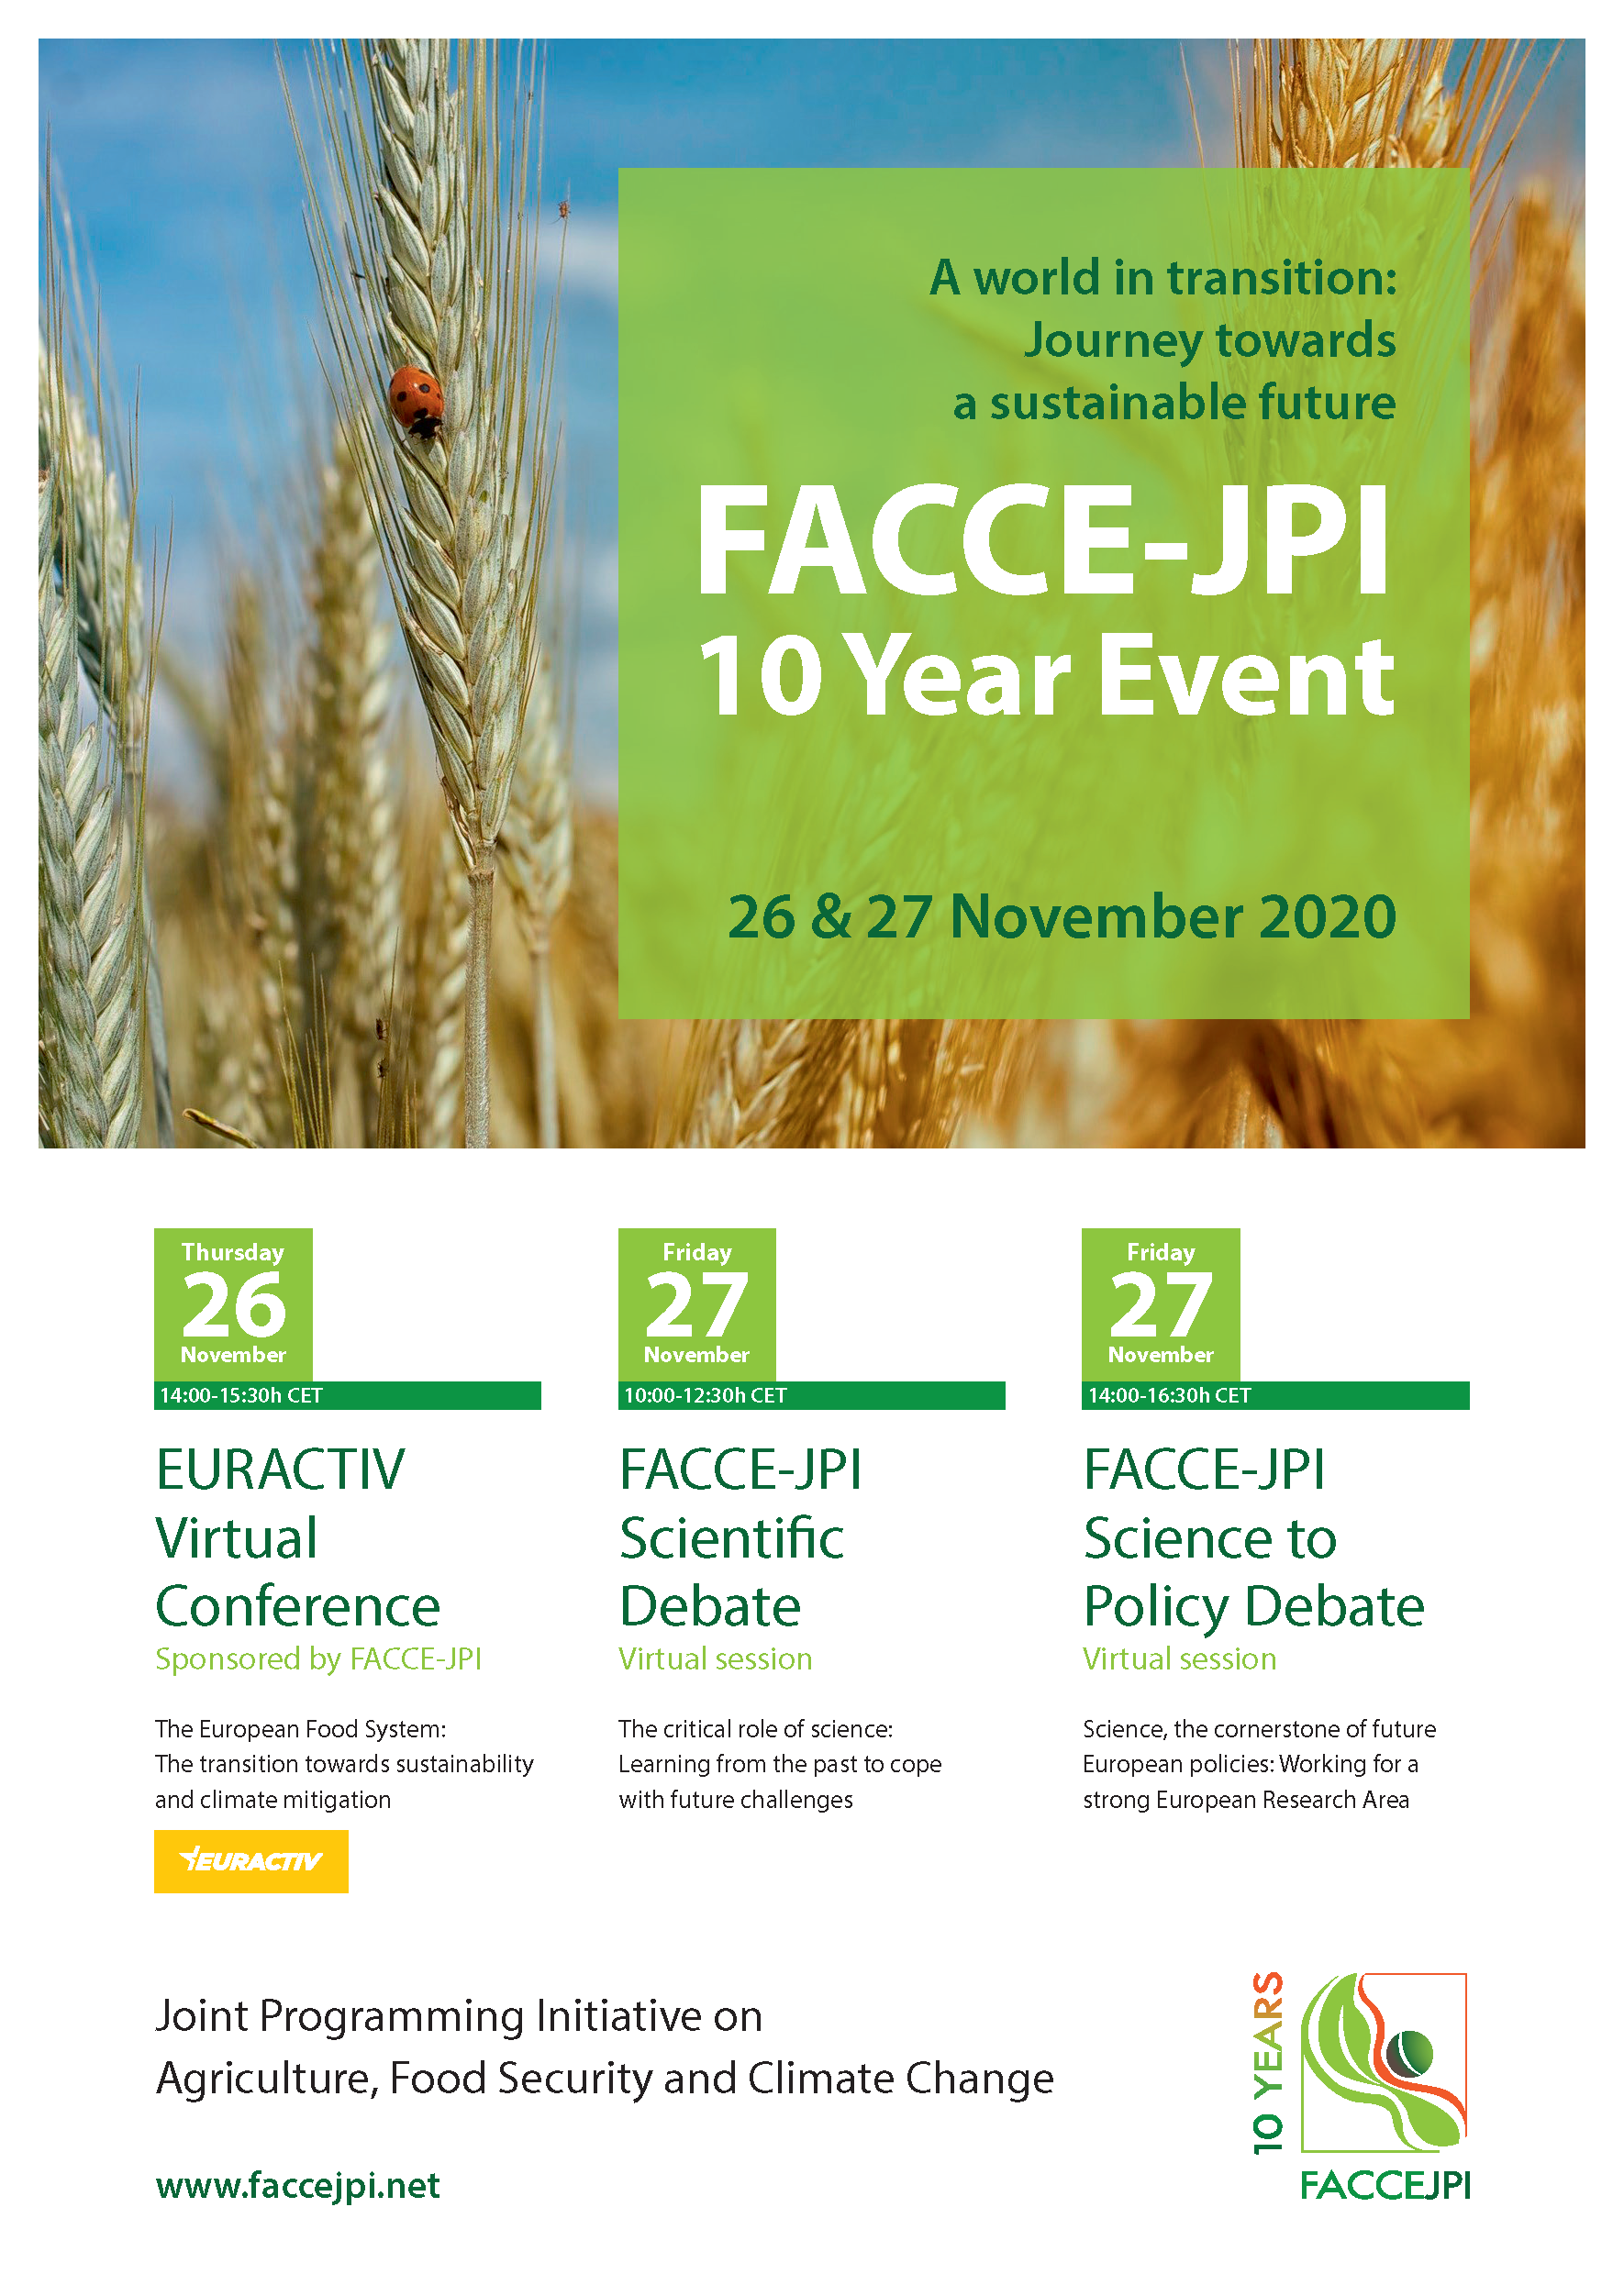 FACCE-JPI virtual event: A world in transition: Journey towards a sustainable future, 26 & 27 November 2020